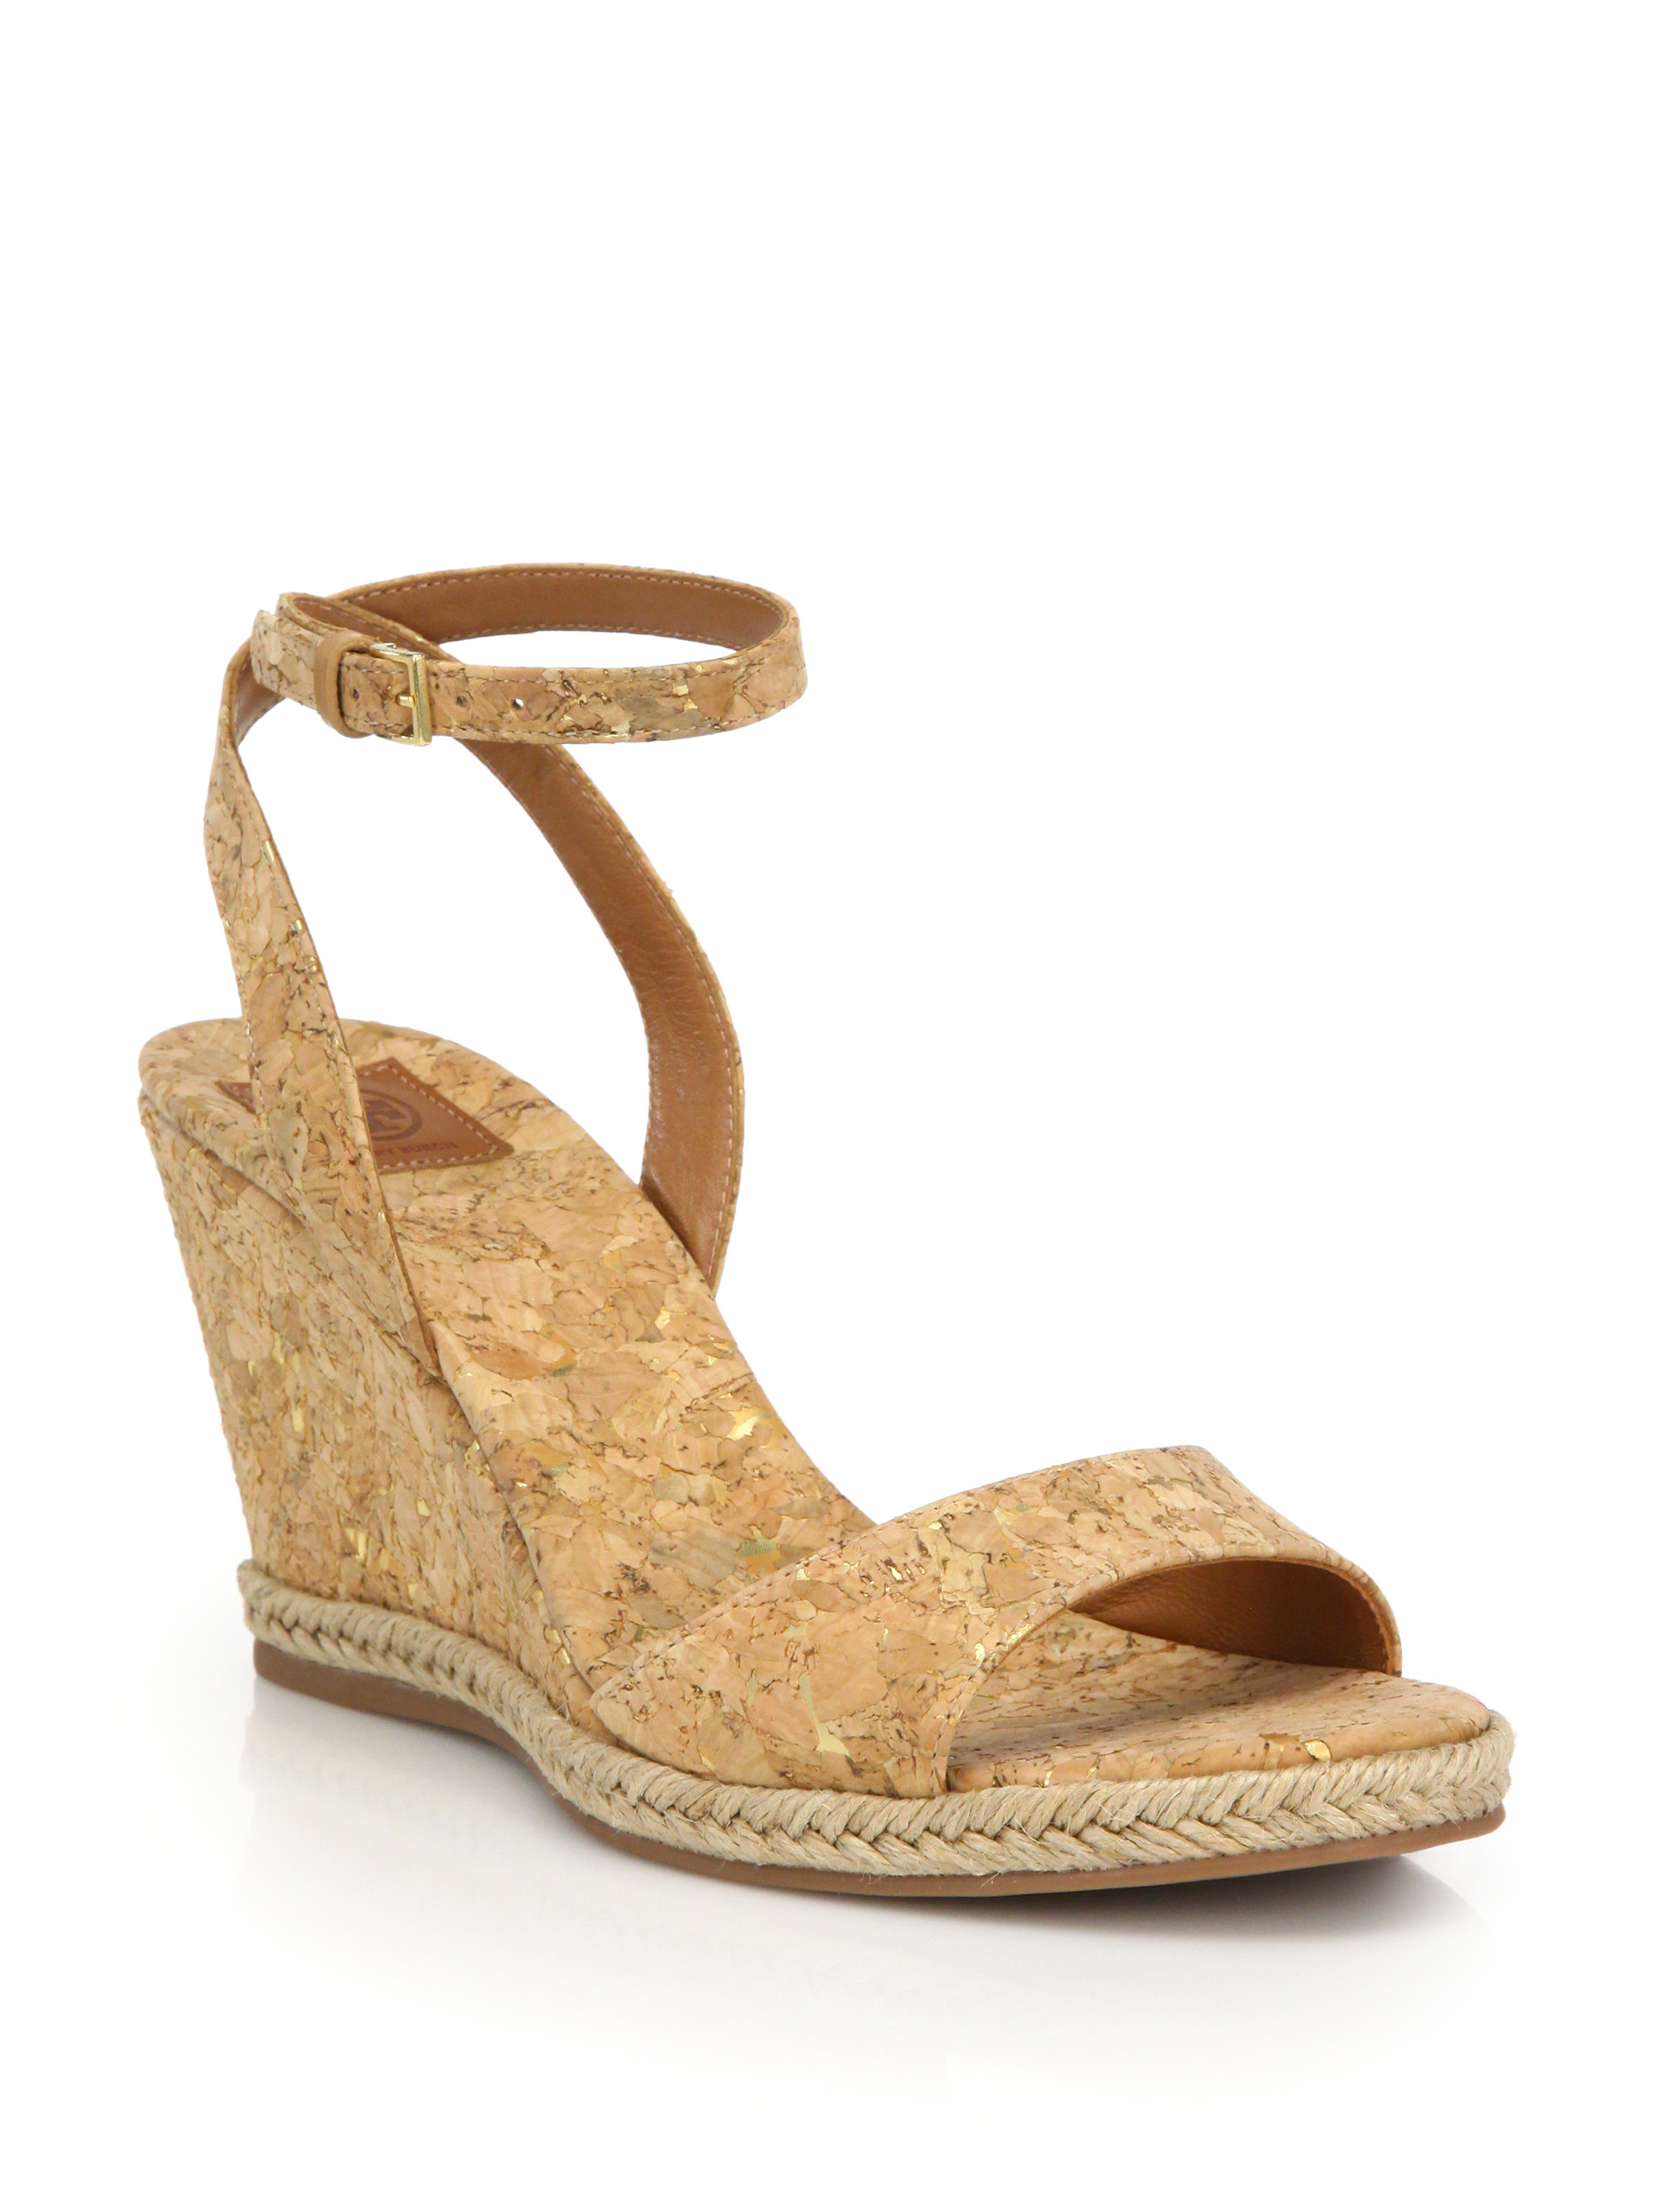 Tory Burch Marion Cork Wedge Sandals in Natural | Lyst